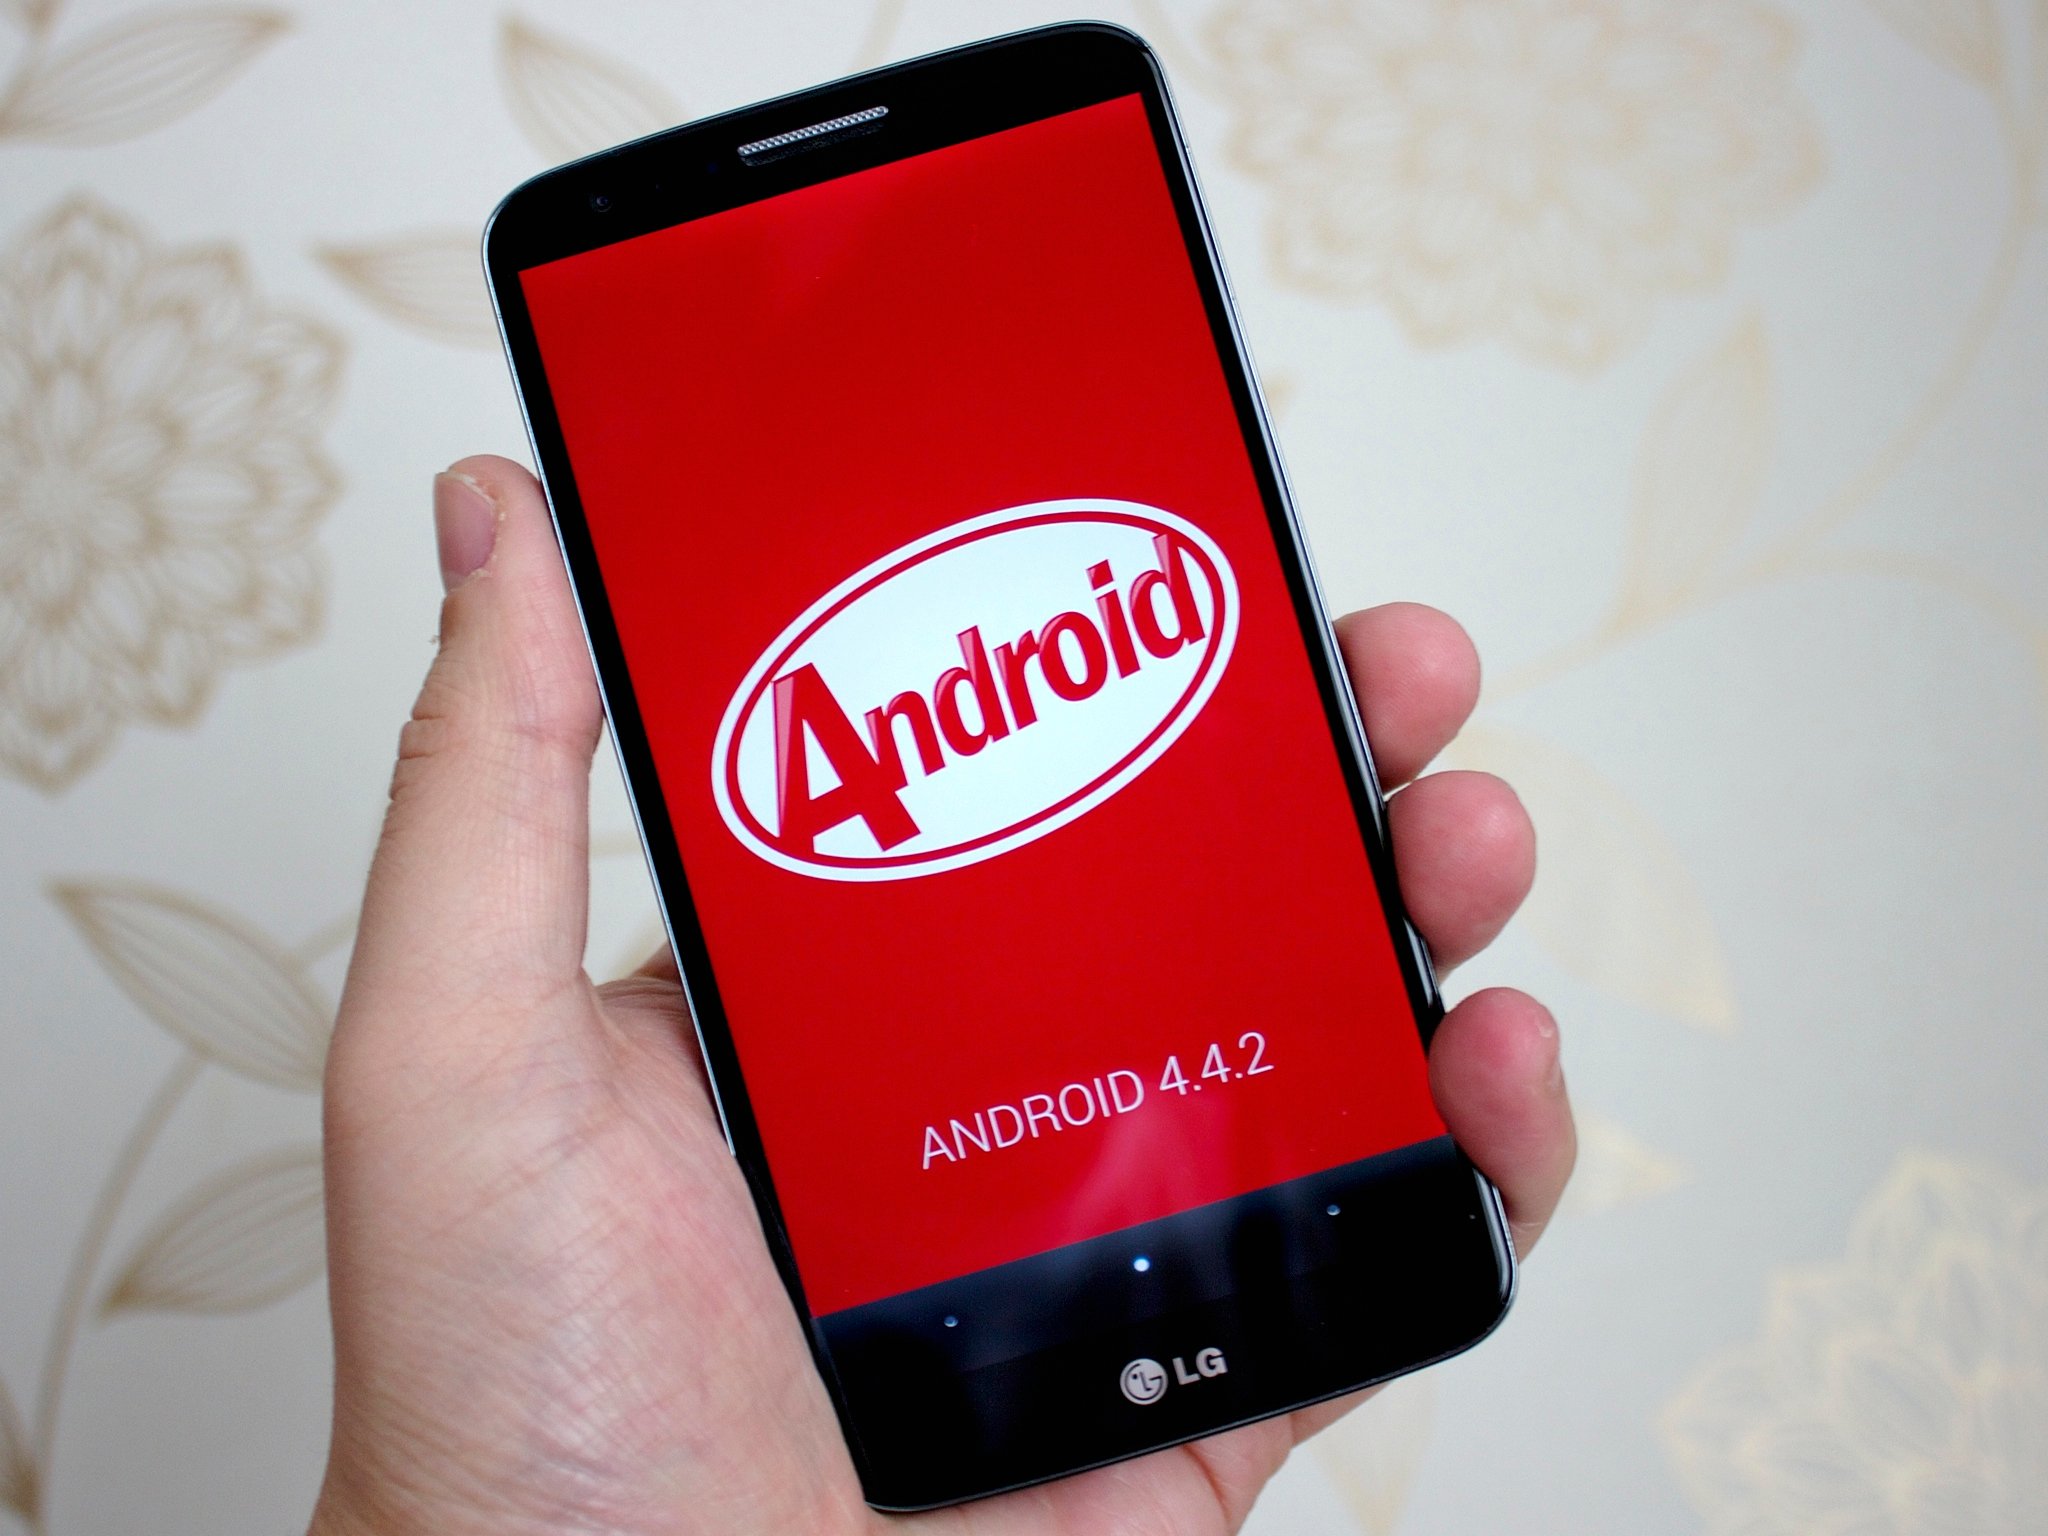 KitKat rolling out for LG G2 on Sprint